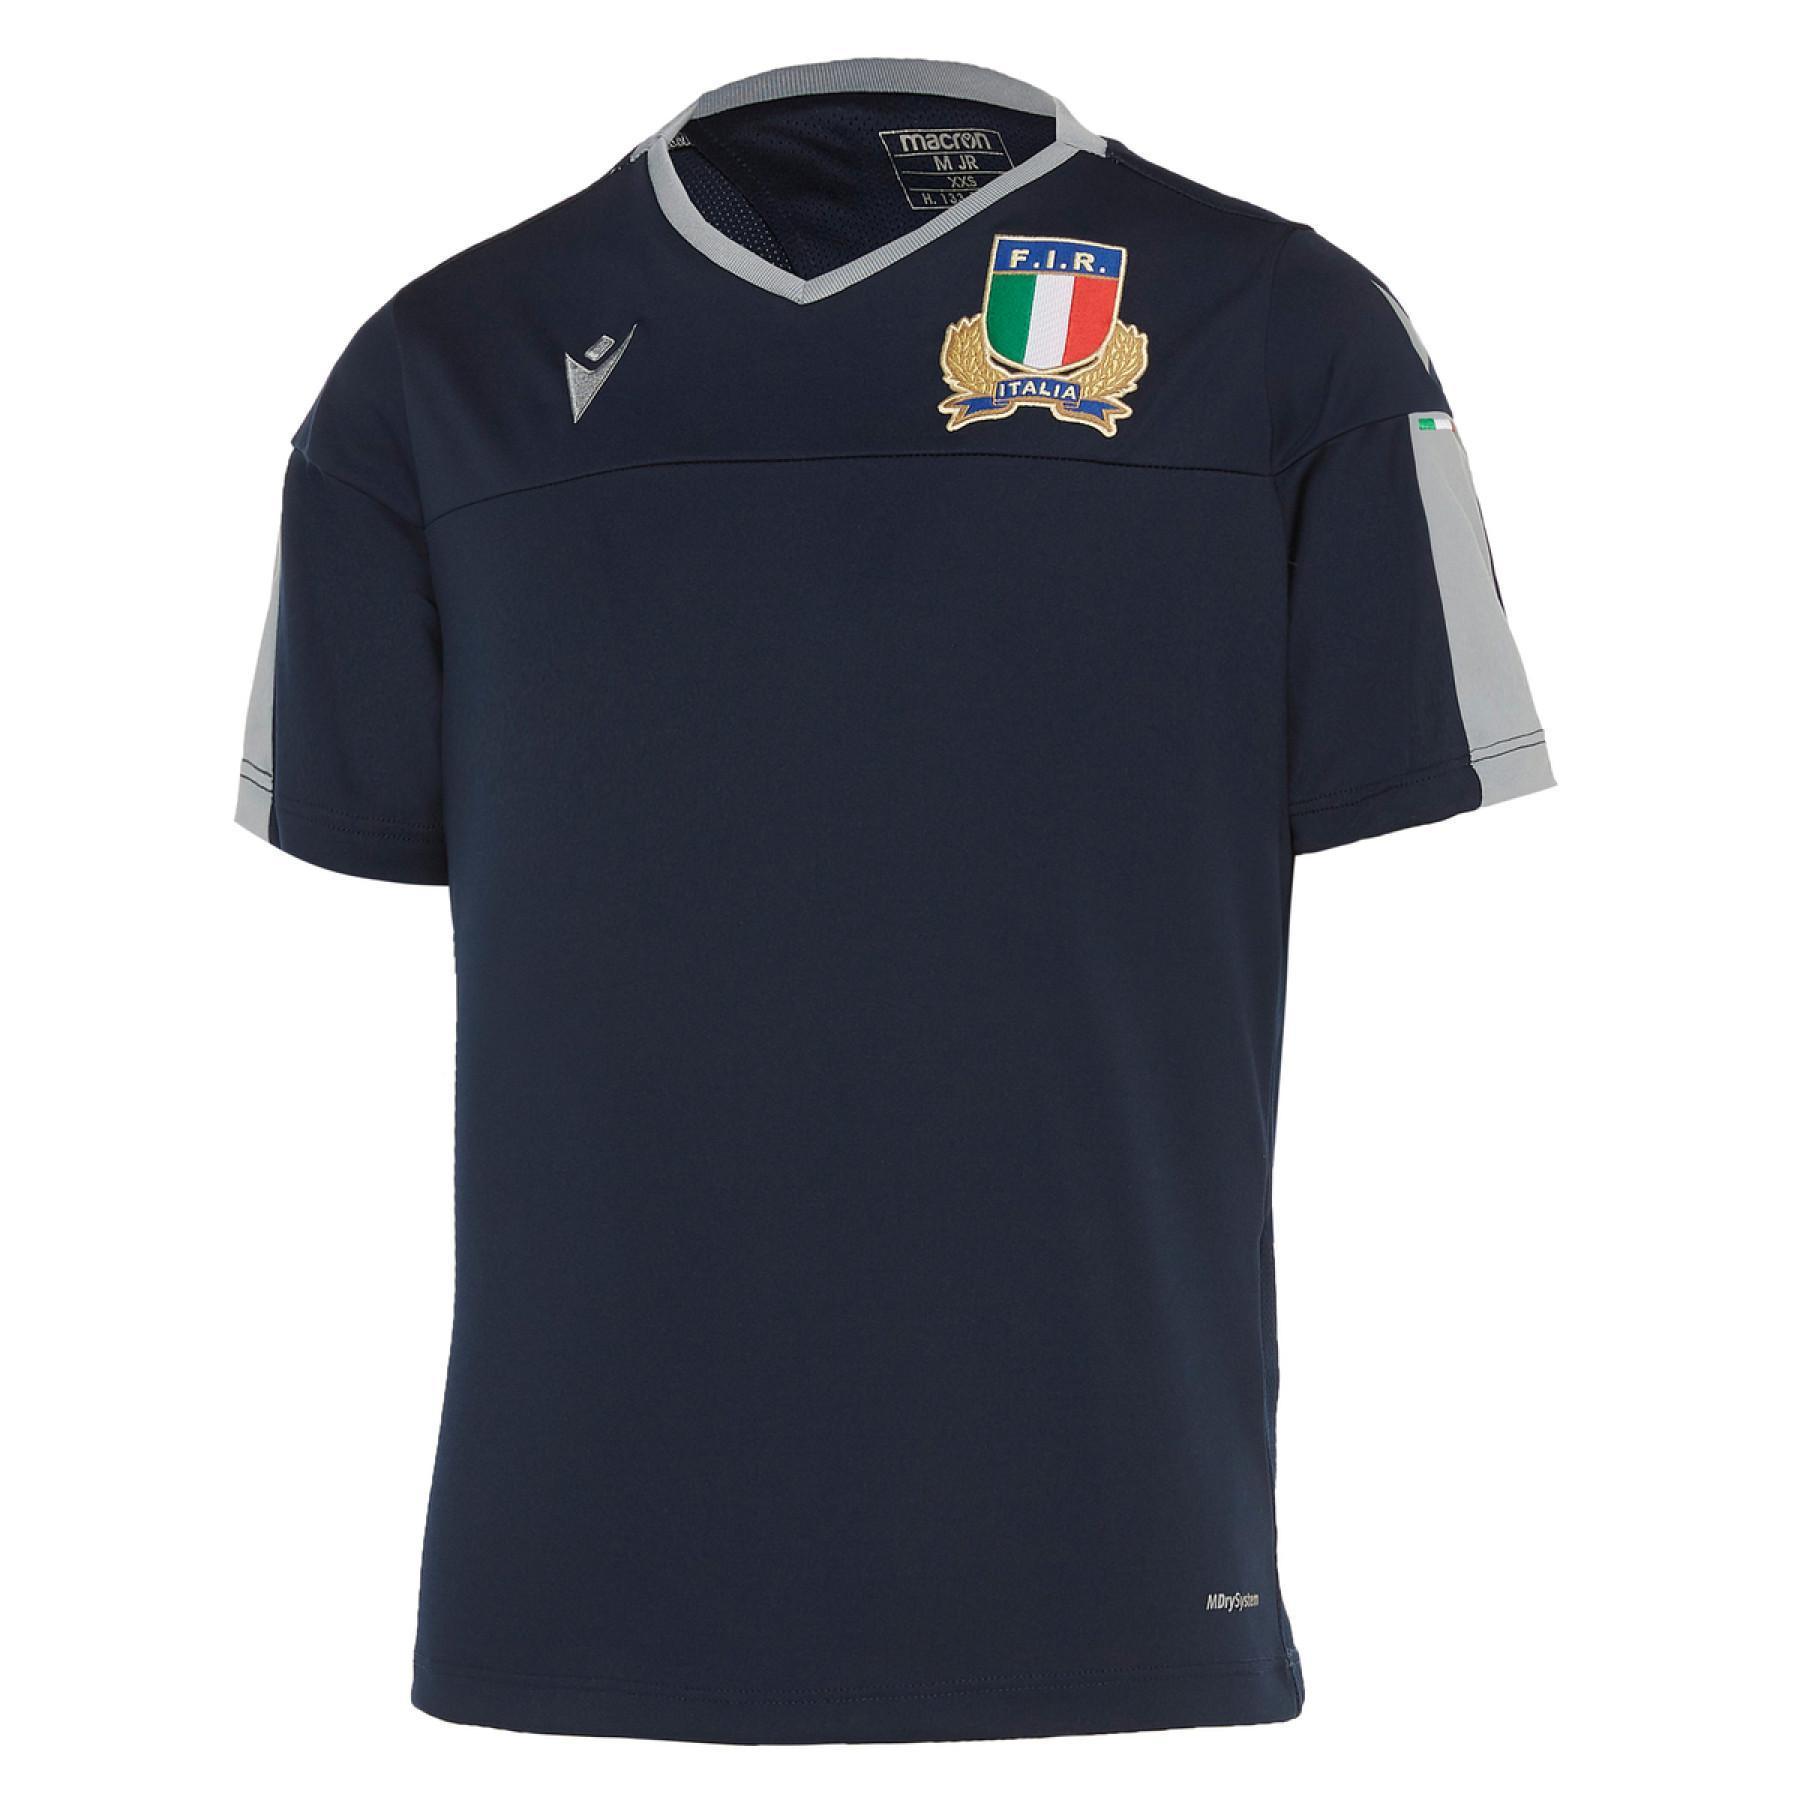 Staff T-shirt Italie rugby 2019